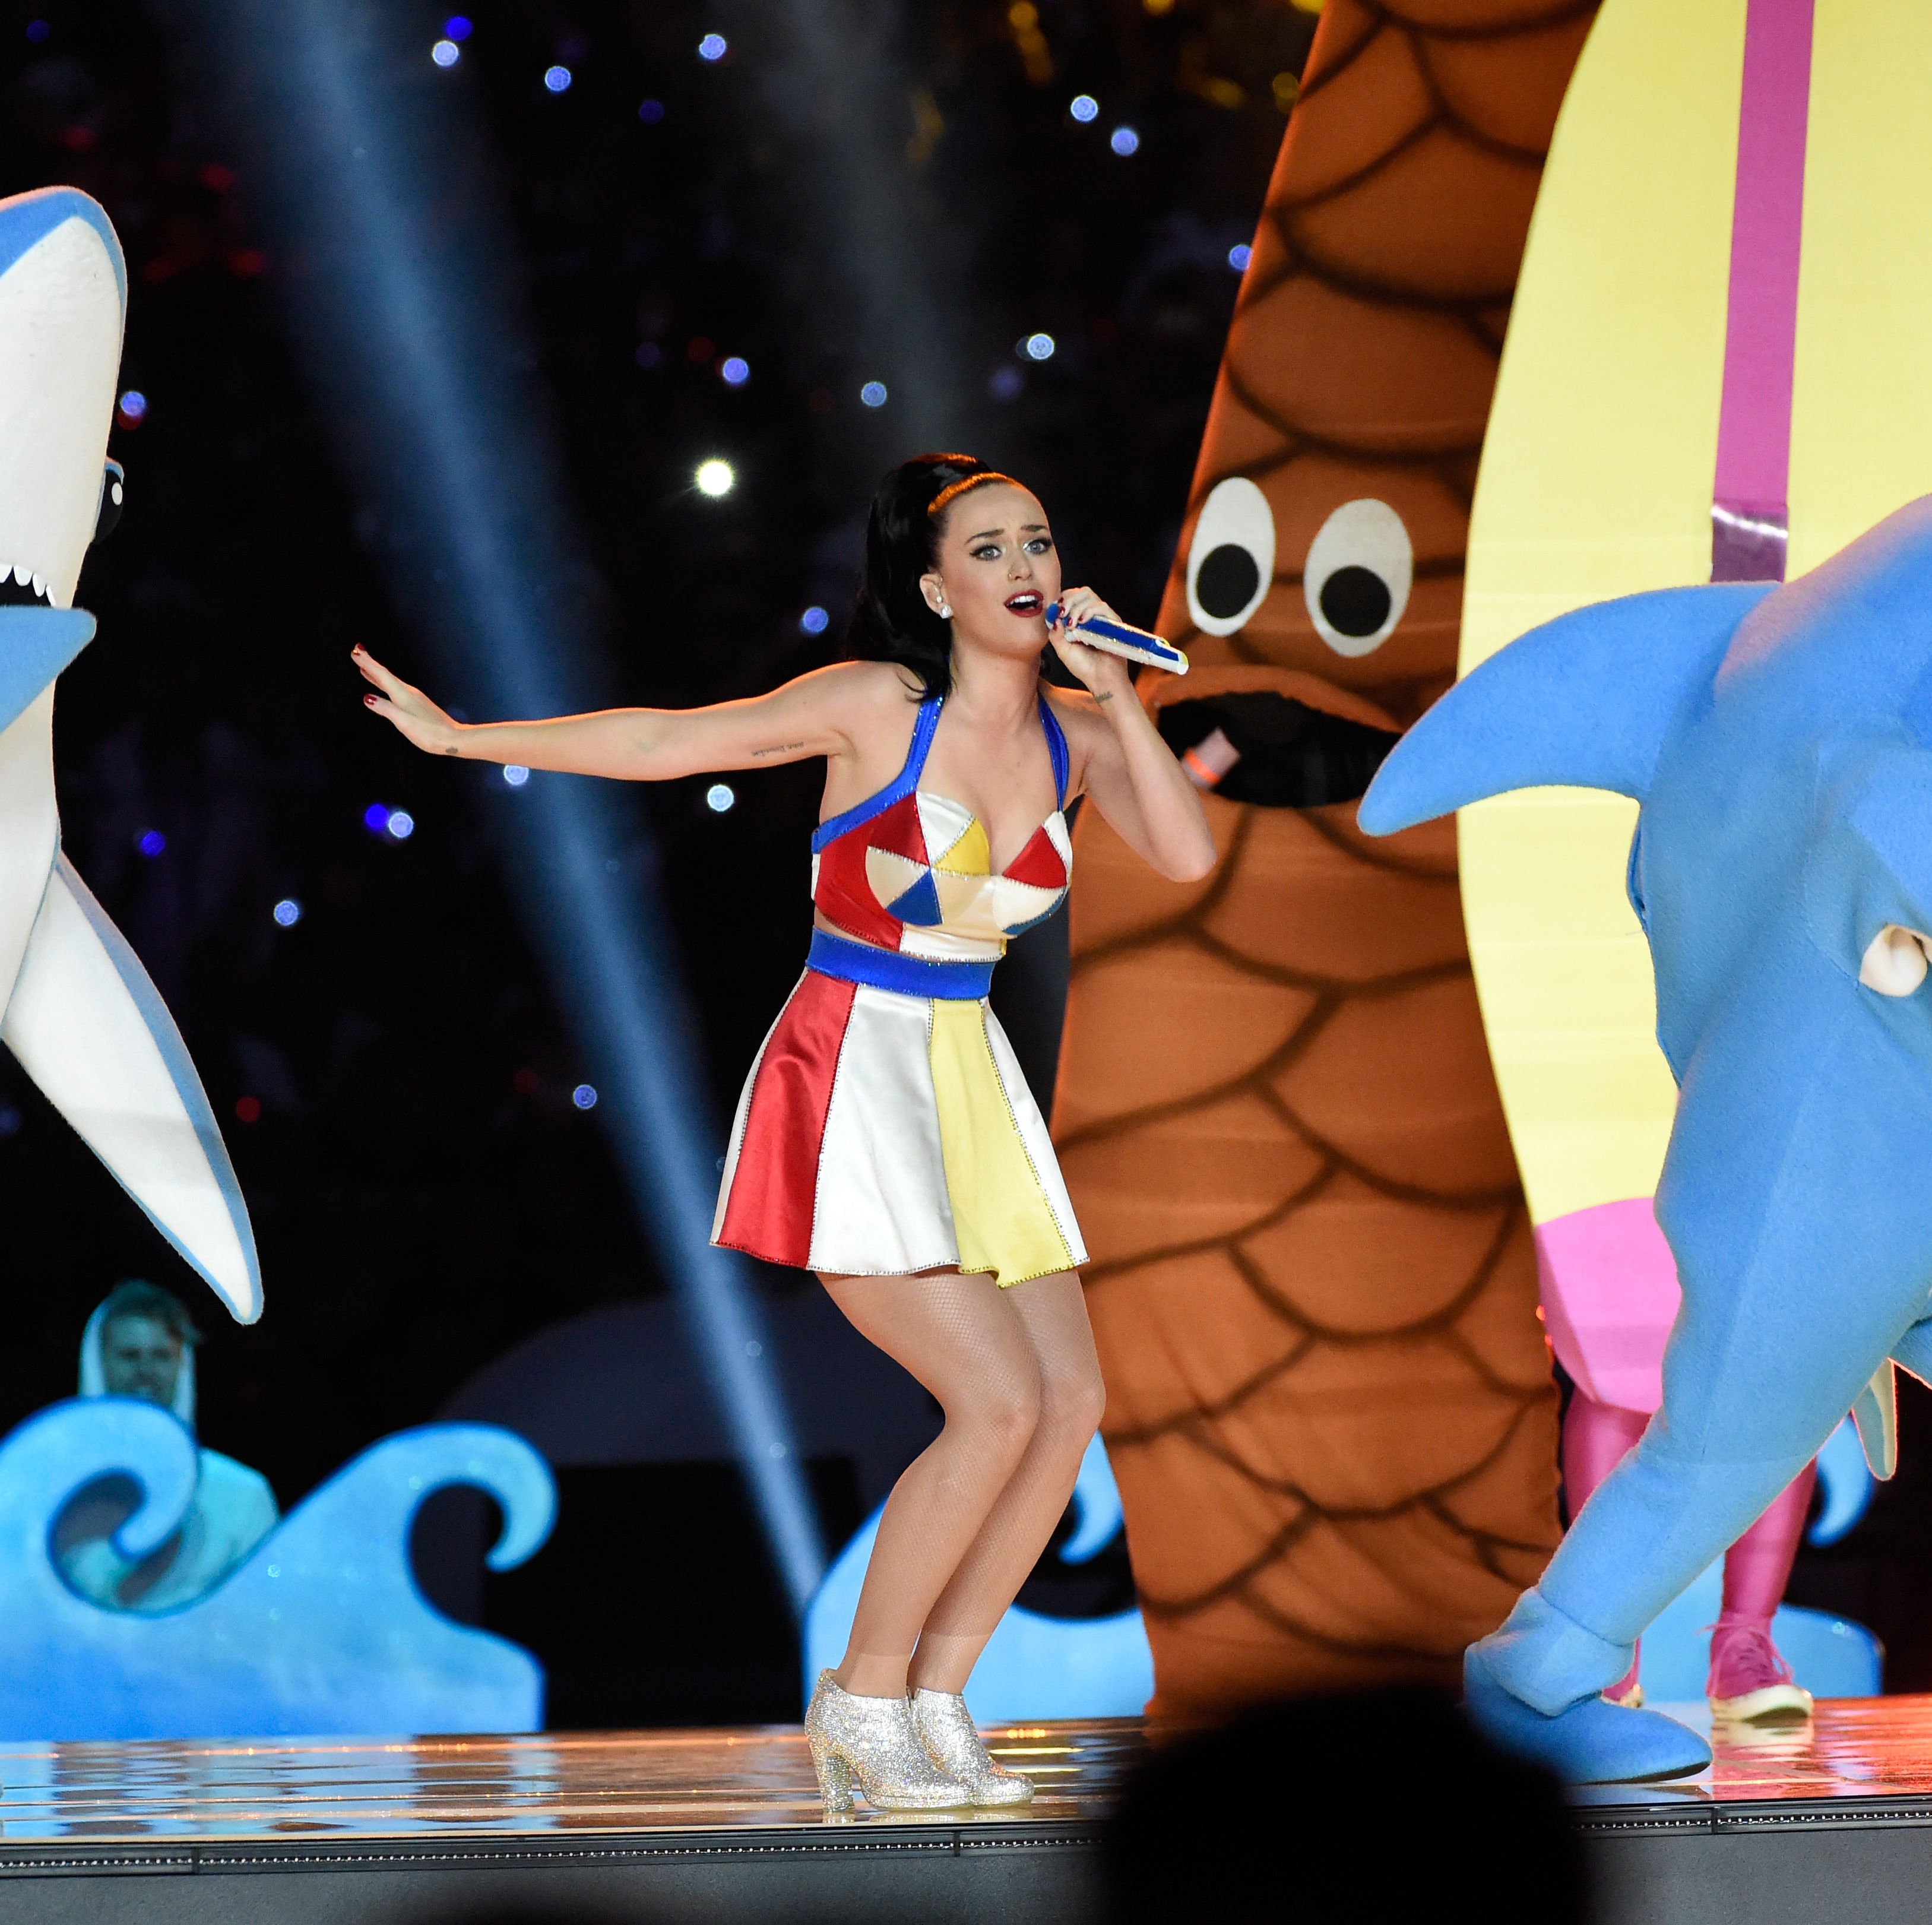 A Clip of Katy Perry's 10-Second Halftime Show Outfit Change Has Been Unearthed